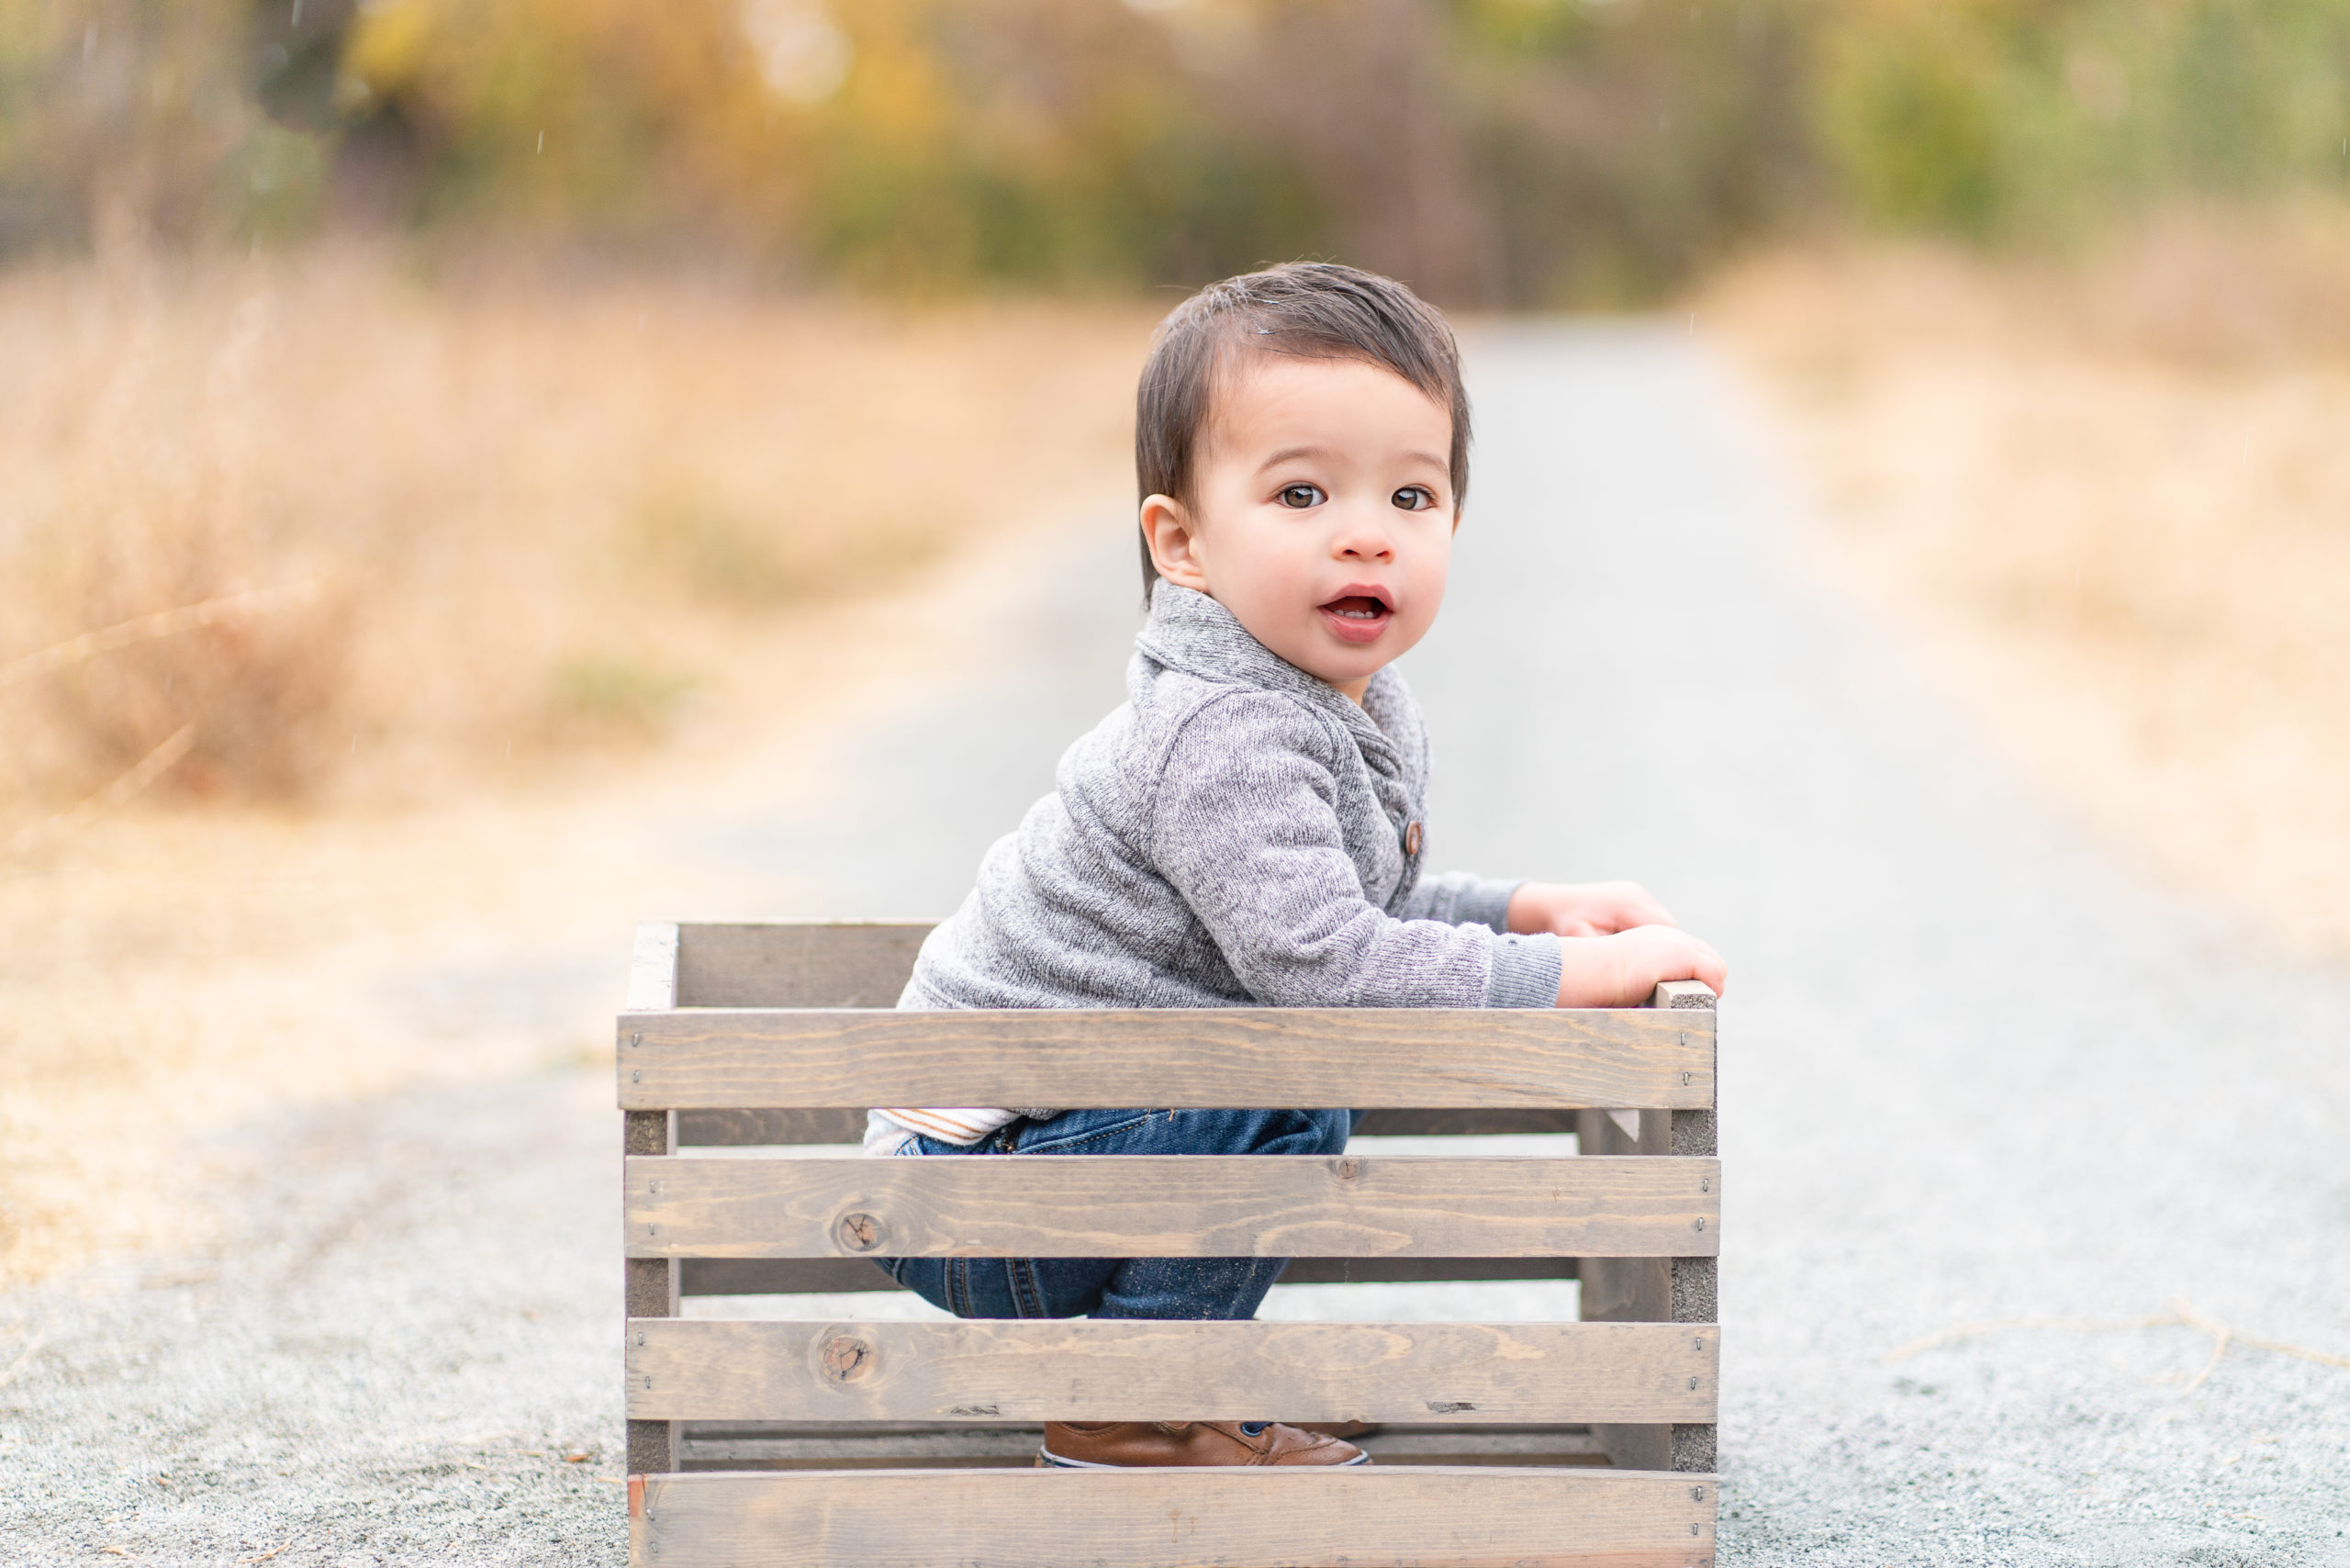 little boy outdoors sitting in a wooden crate